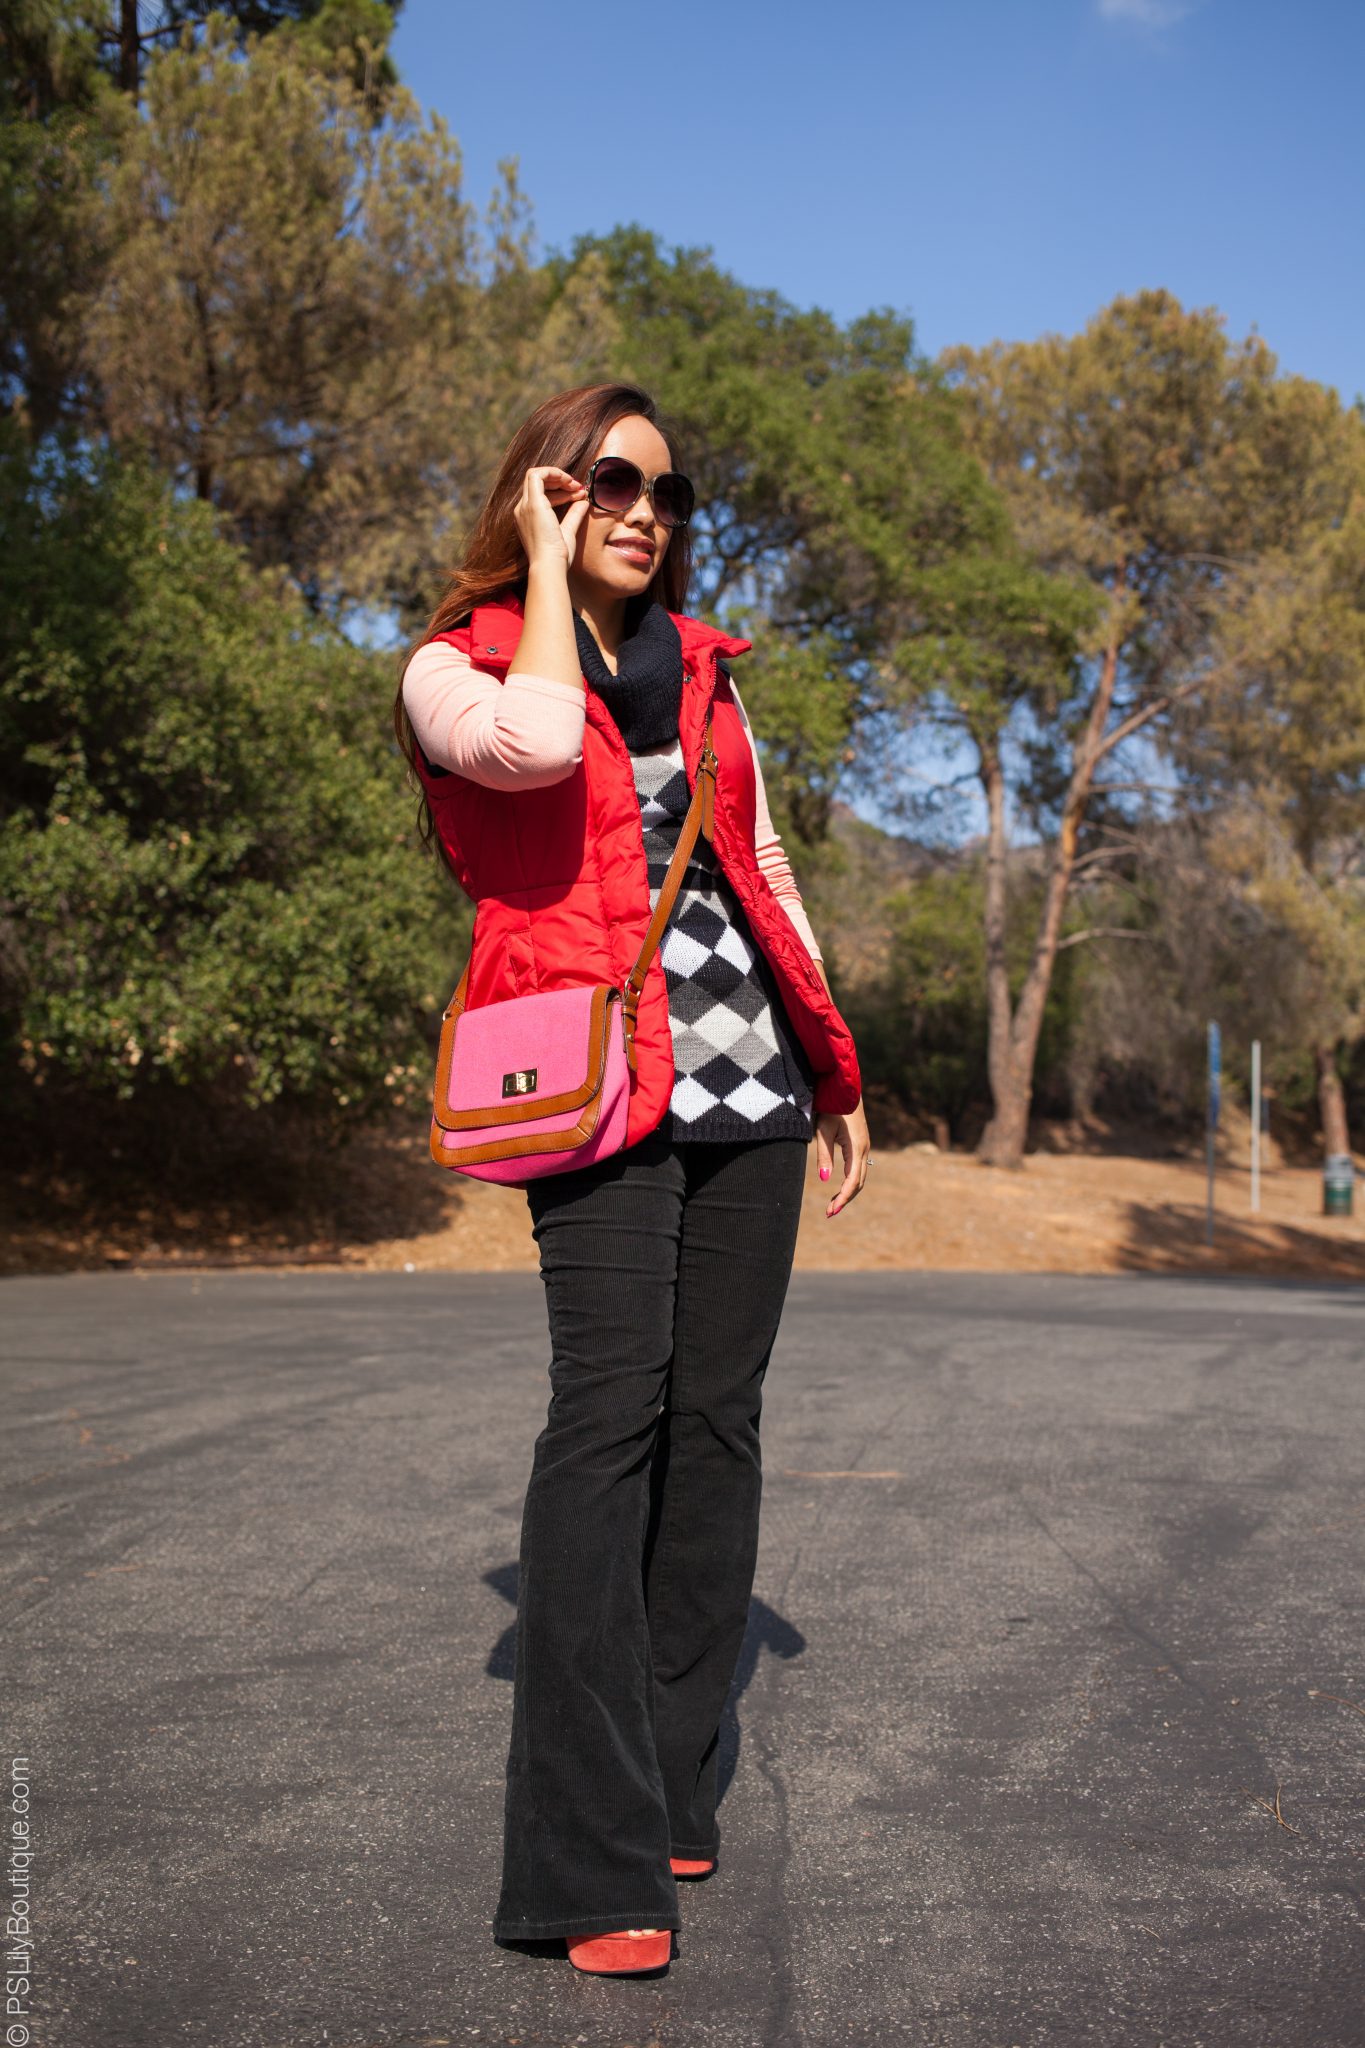 pslilyboutique, fashion blog, fall 2014 outfit ideas, winter style, red vest, black flared pants, red cross body bag, Instagram @pslilyboutique